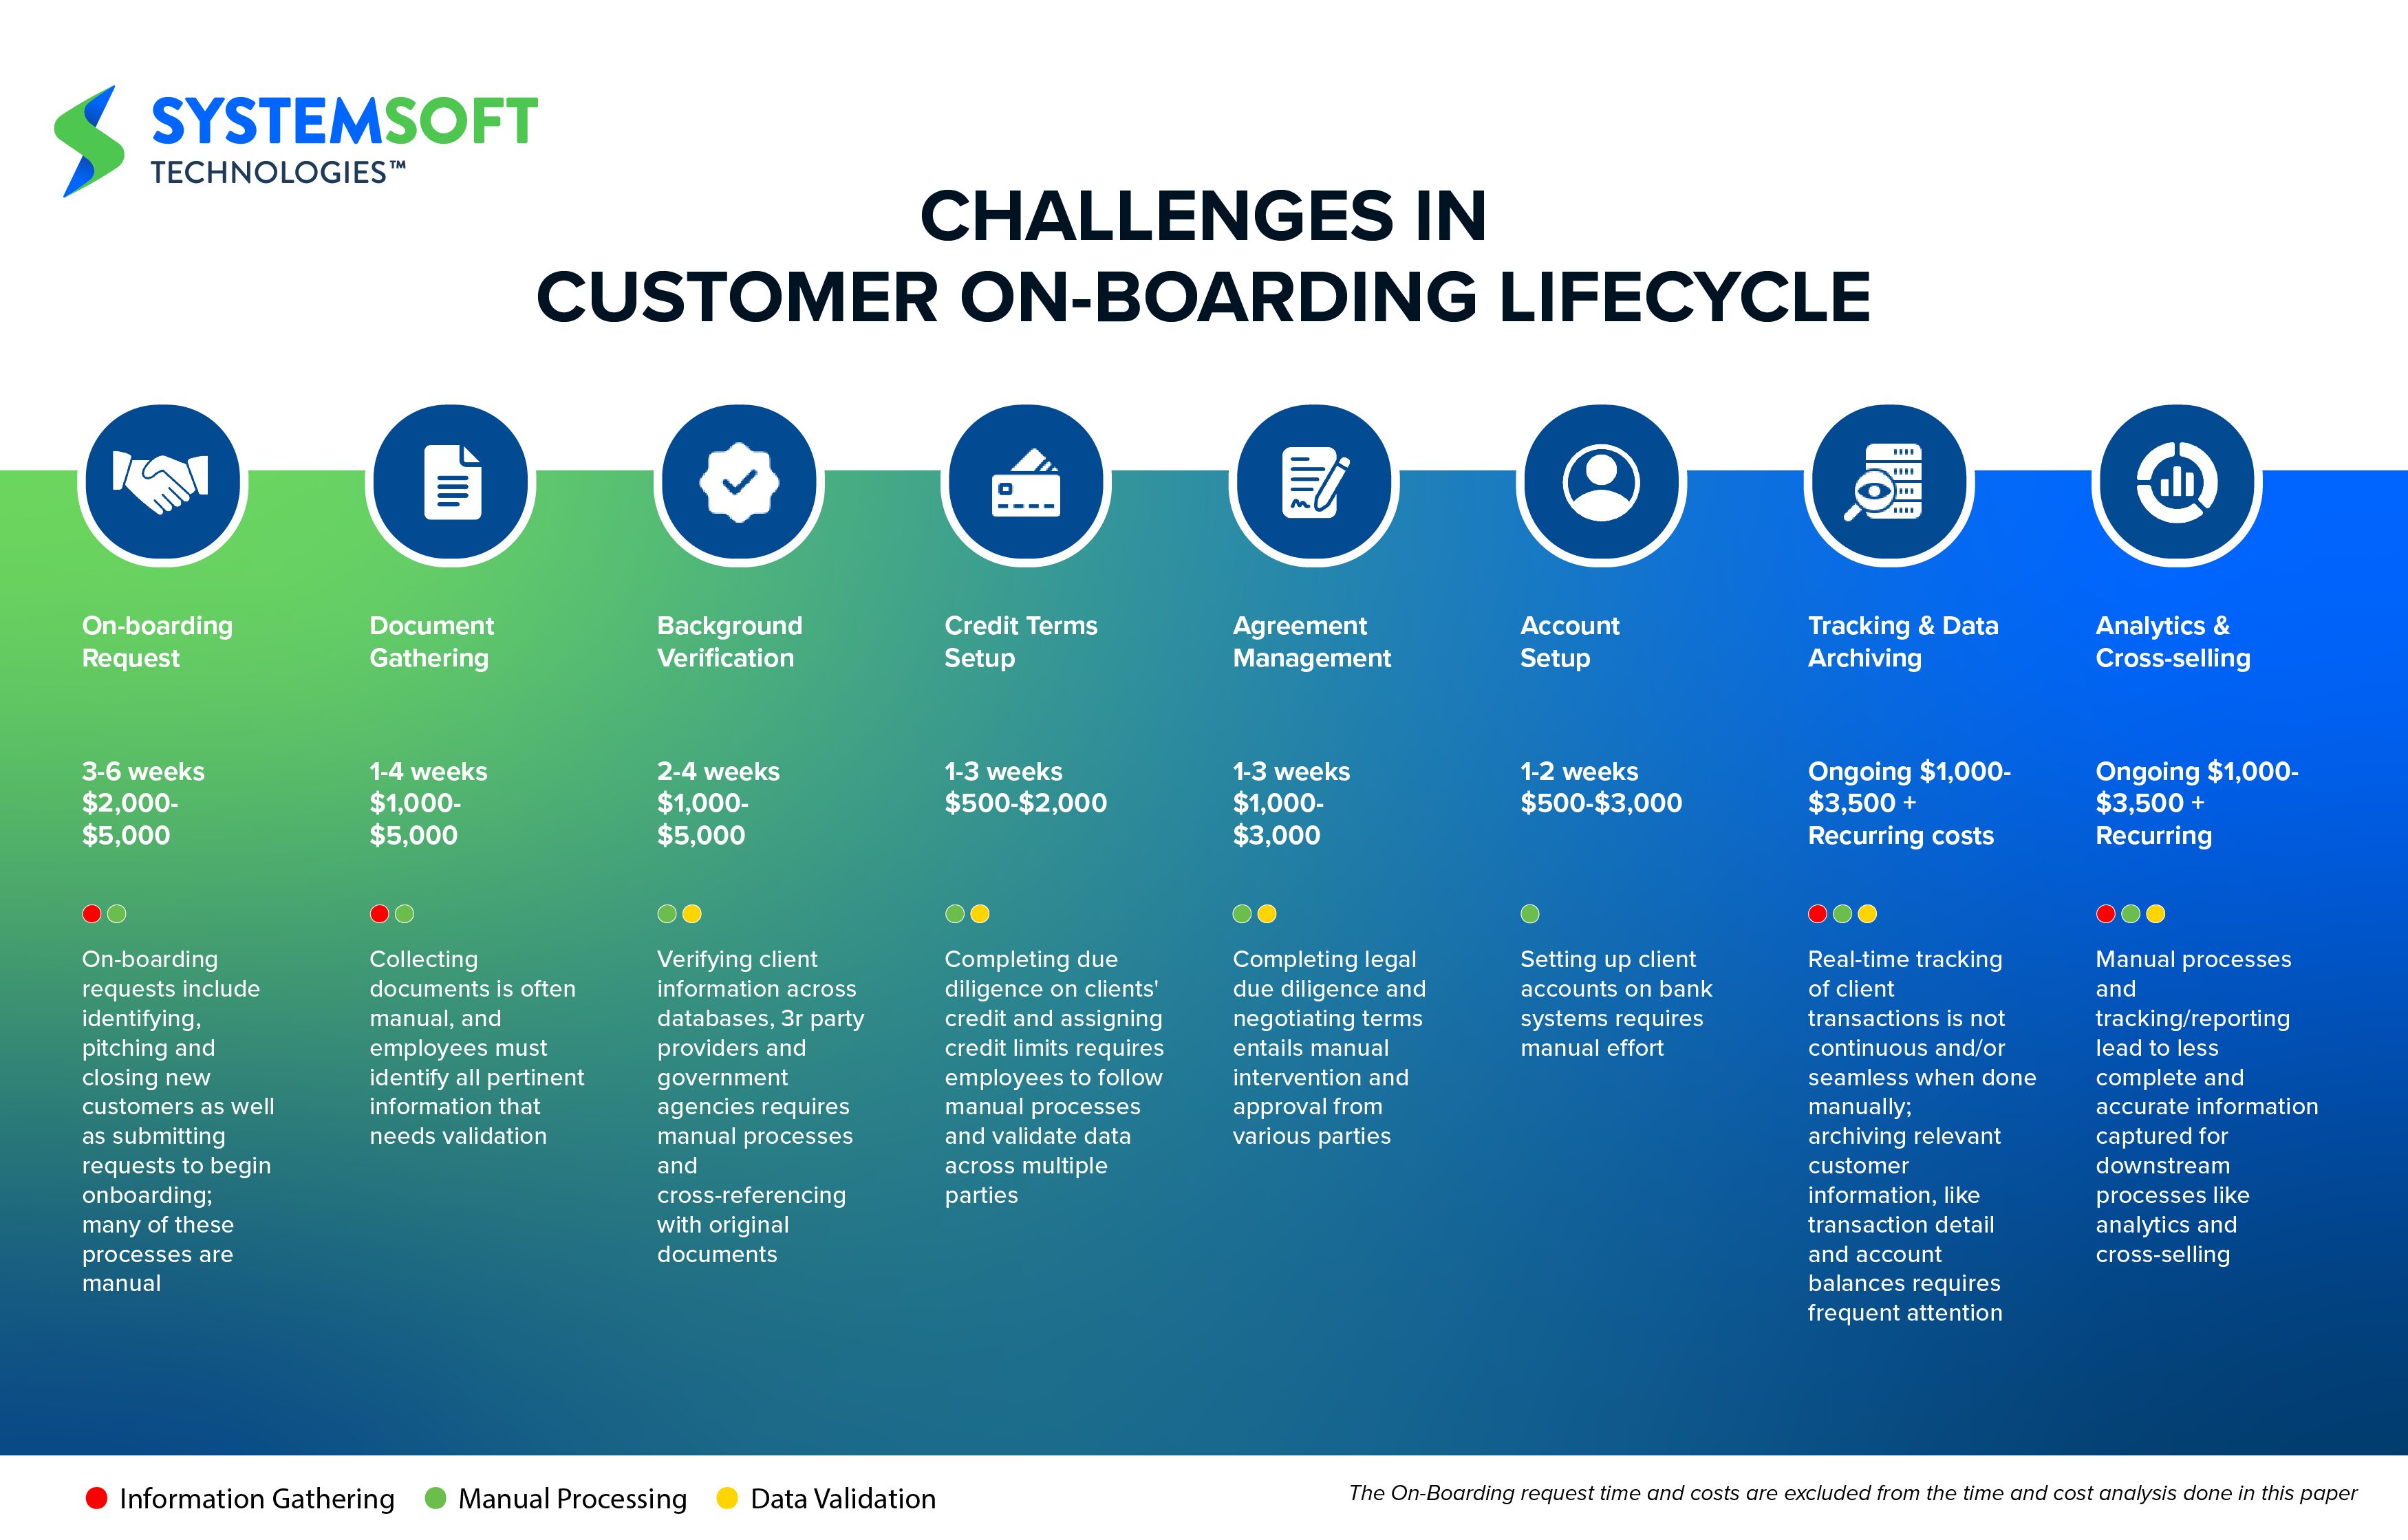 Image shows the challenges in customer on-boarding lifecycle, time spent at each stage and cost to company.